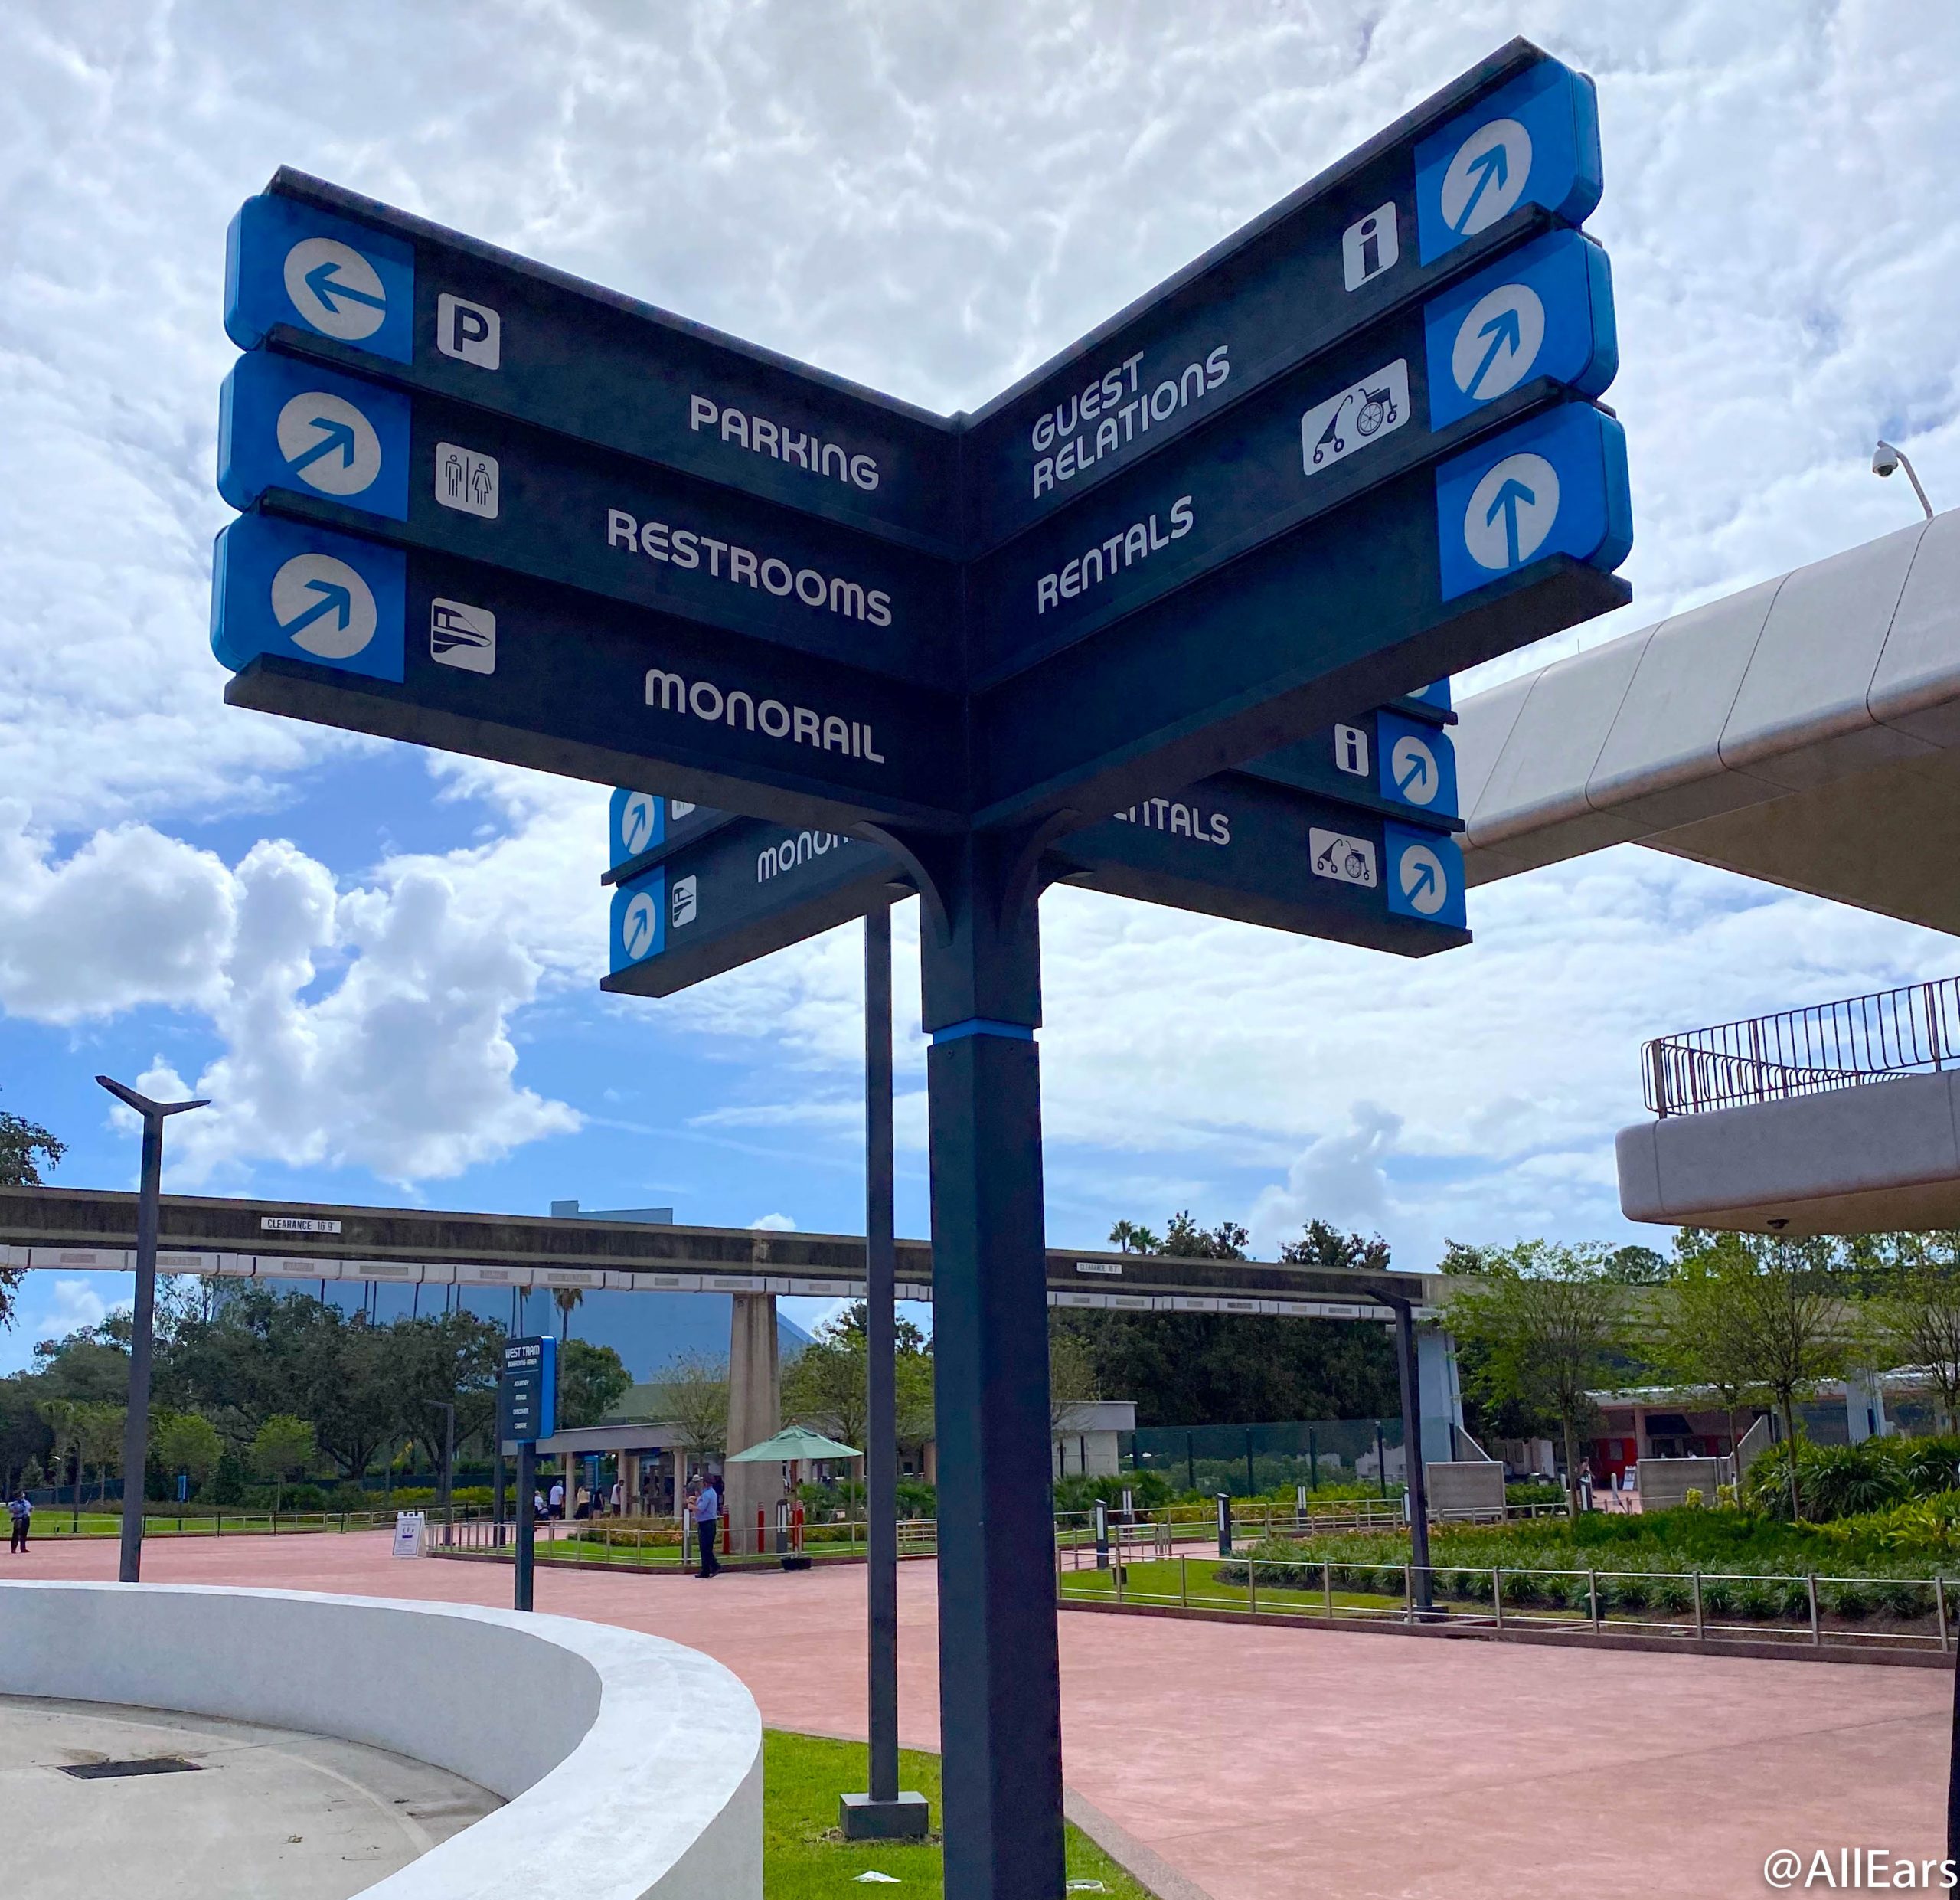 2020 reopening wdw epcot parking lot signs - AllEars.Net